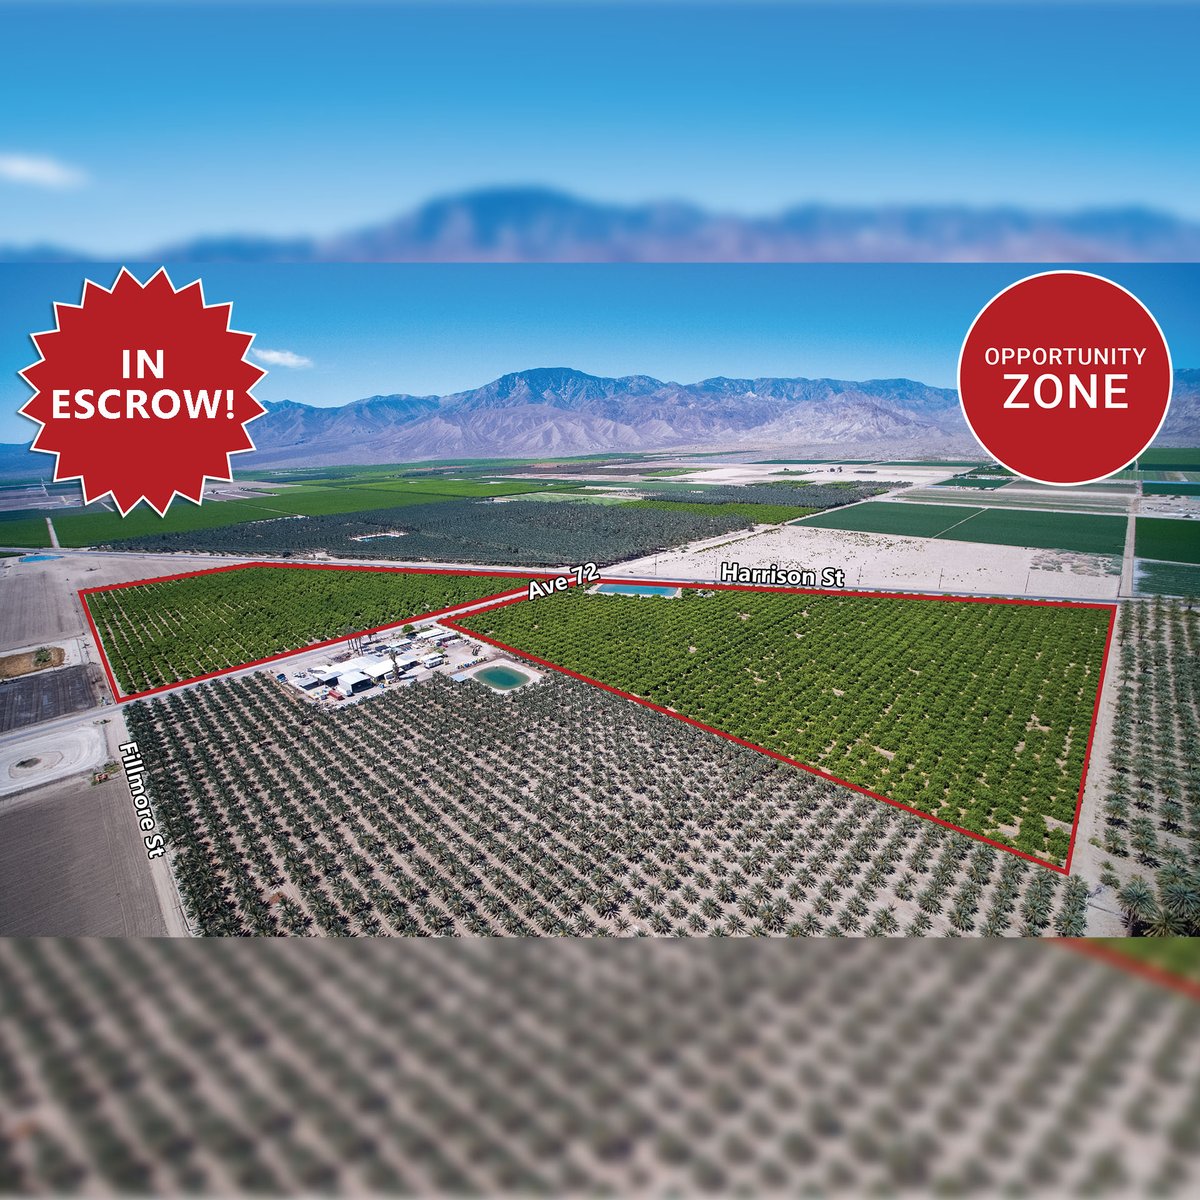 In Escrow! 56 Acre Lemon & Citrus Ranch in Oasis!

Listed by:

Susan Harvey
Emily Harvey

#coachellavalley #coachellavalleyrealestate #forsale #southerncaliforniarealestate #socalrealestate #realestate  #property #agricultureland #agriculturelandproperty #propertysales #Oasis